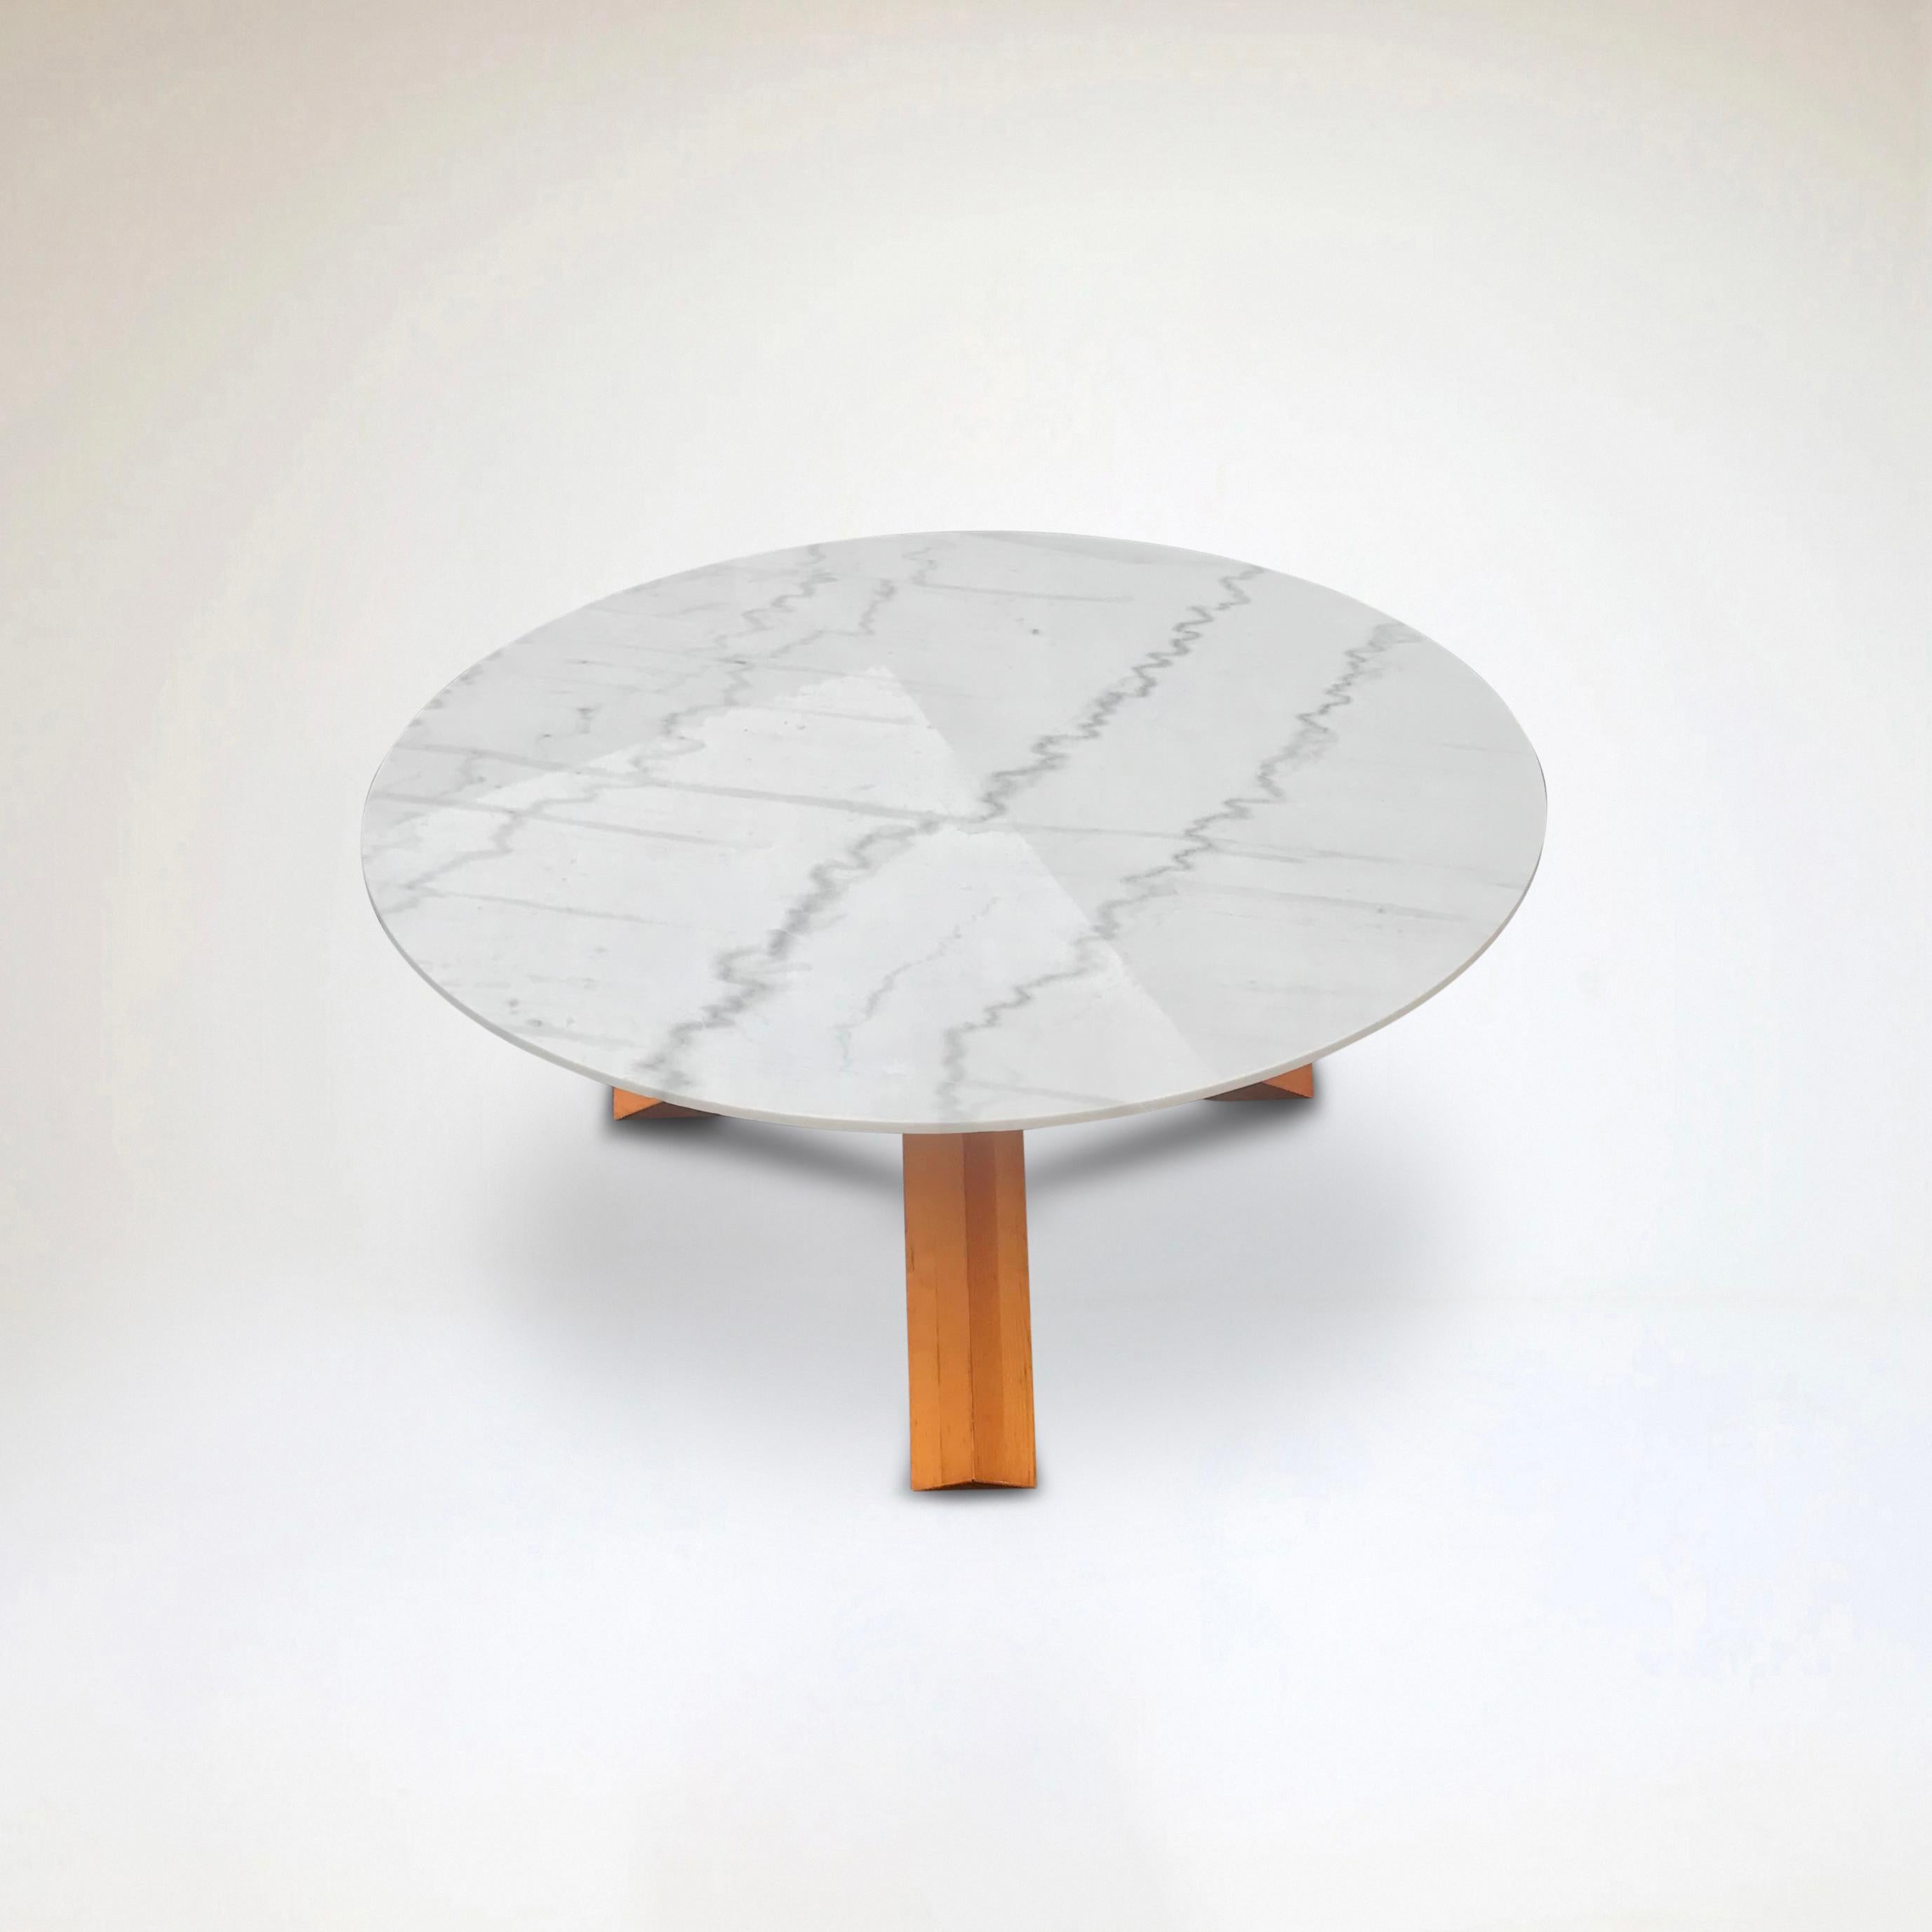 Marble La Rotonda Ash and marble dining table by Mario Bellini for Cassina 1980s For Sale